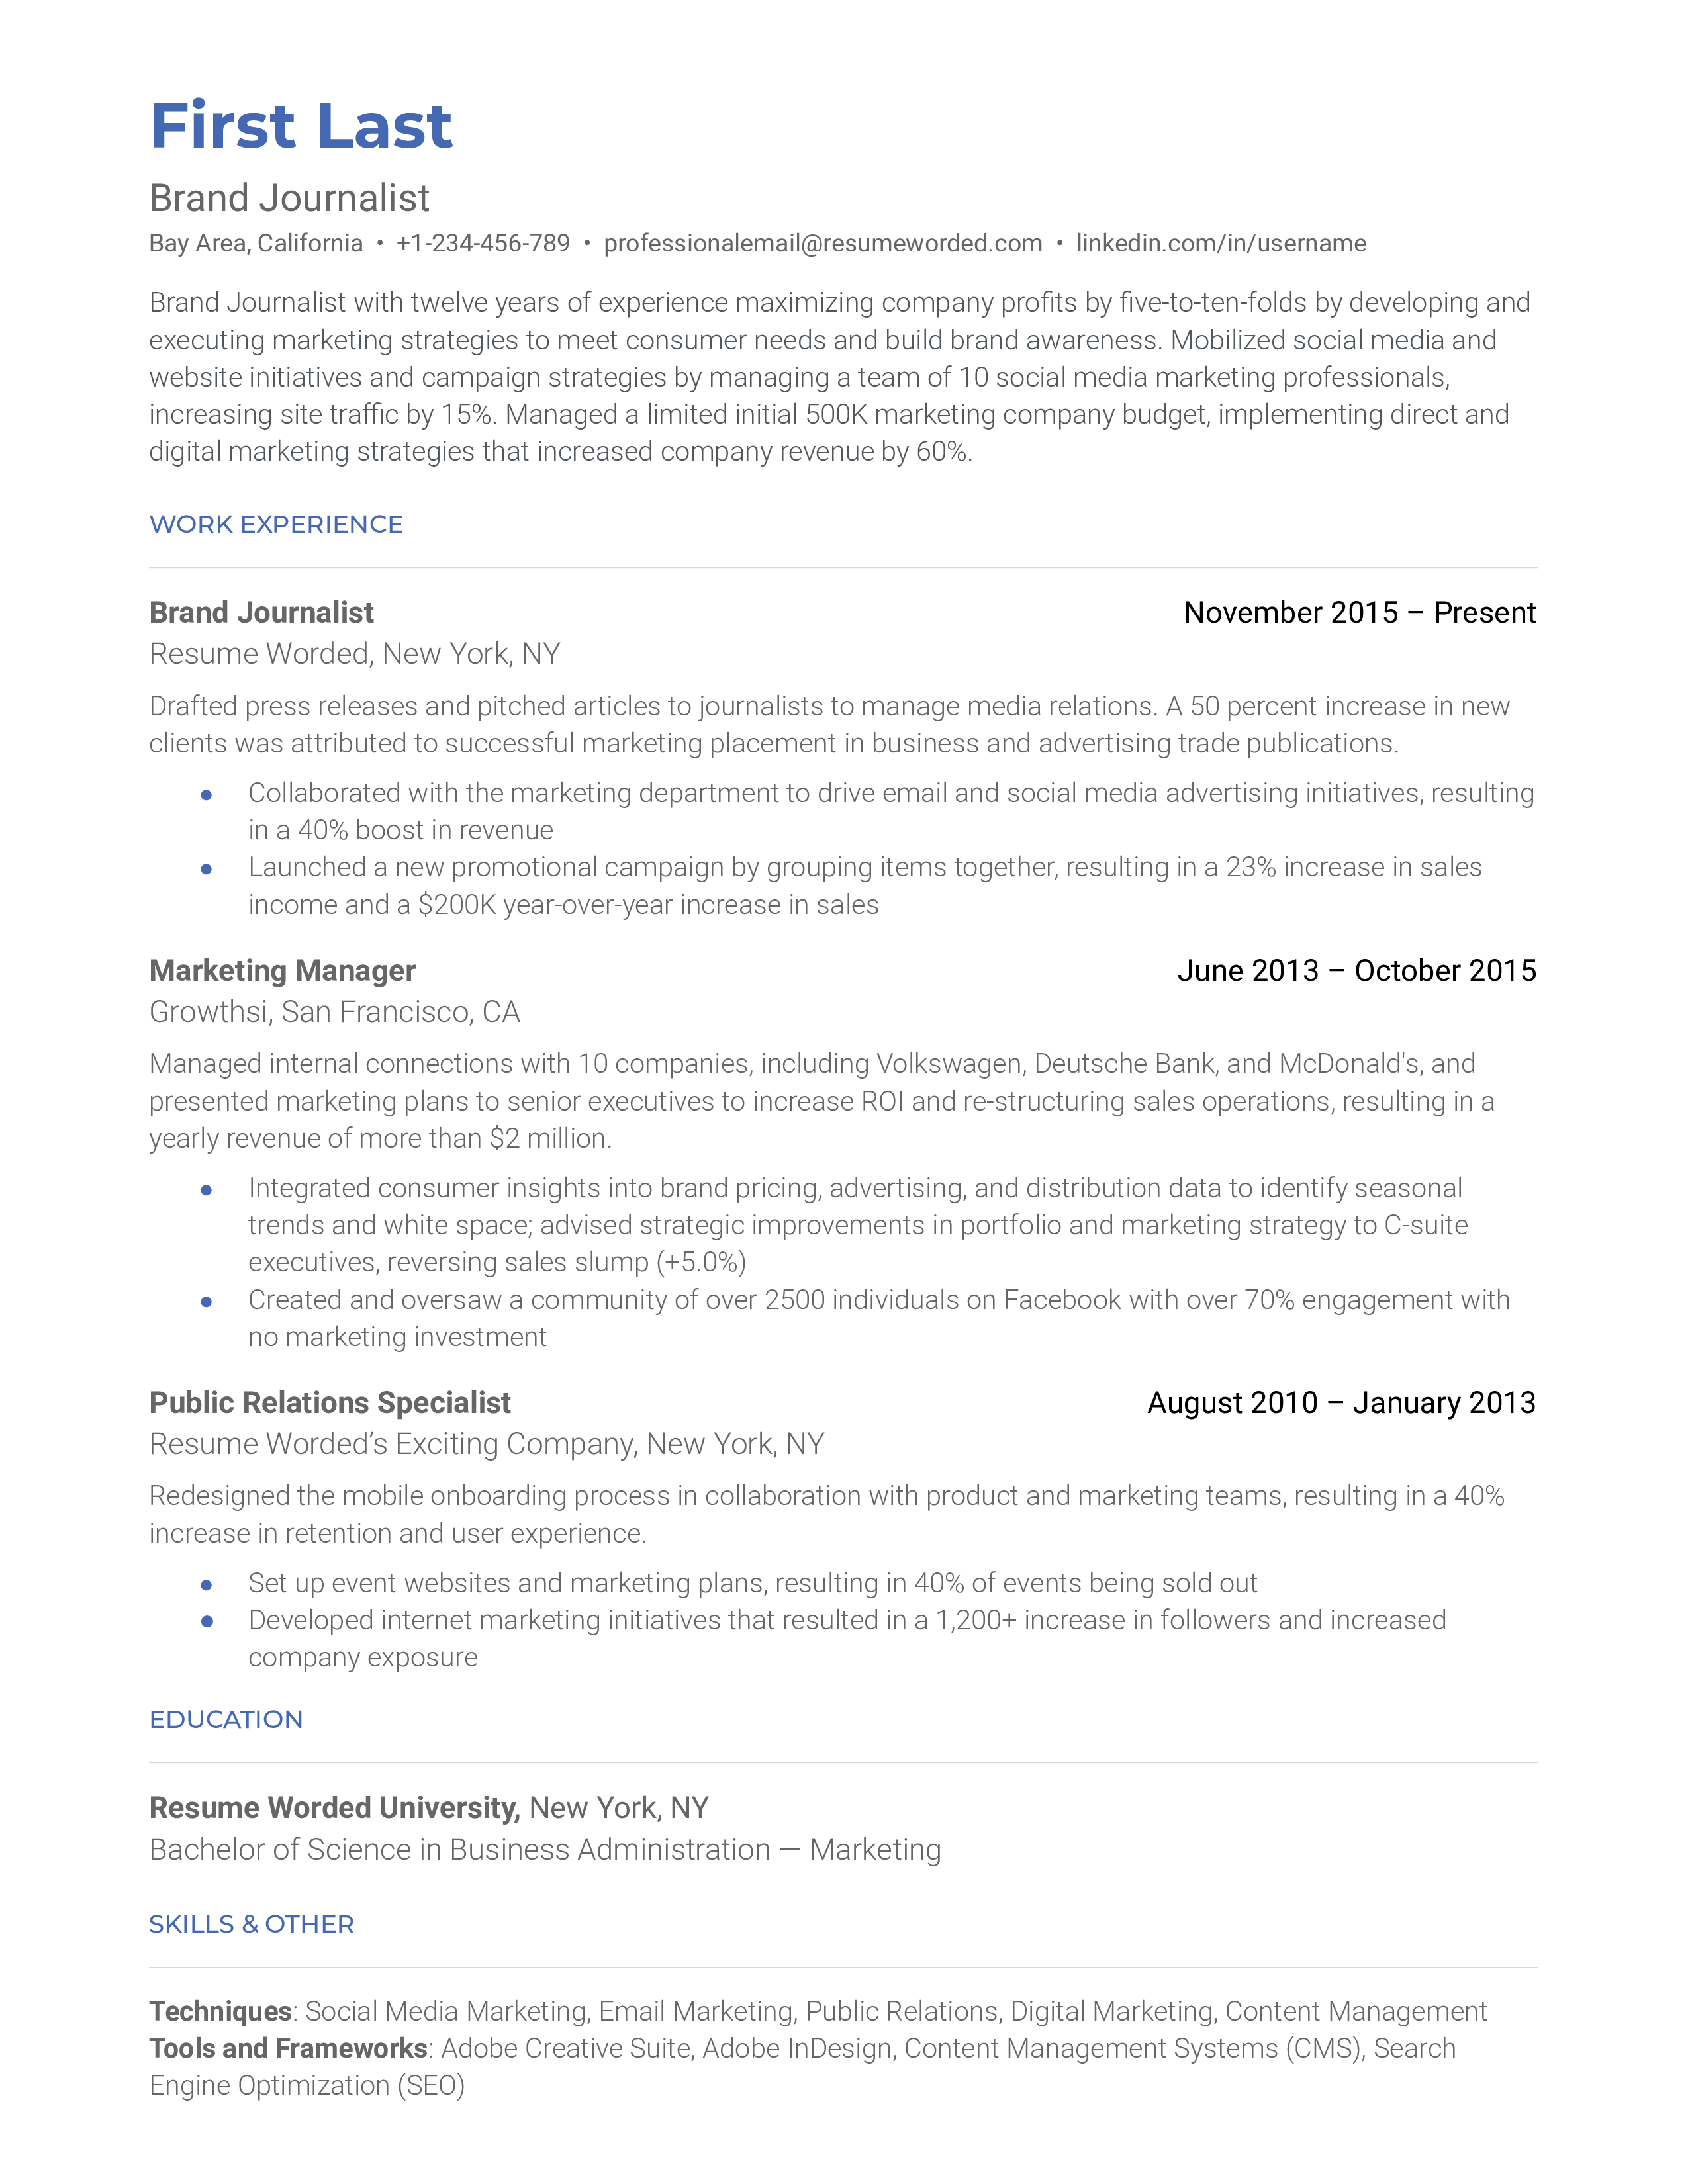 Brand Journalist CV with focus on storytelling and industry knowledge.